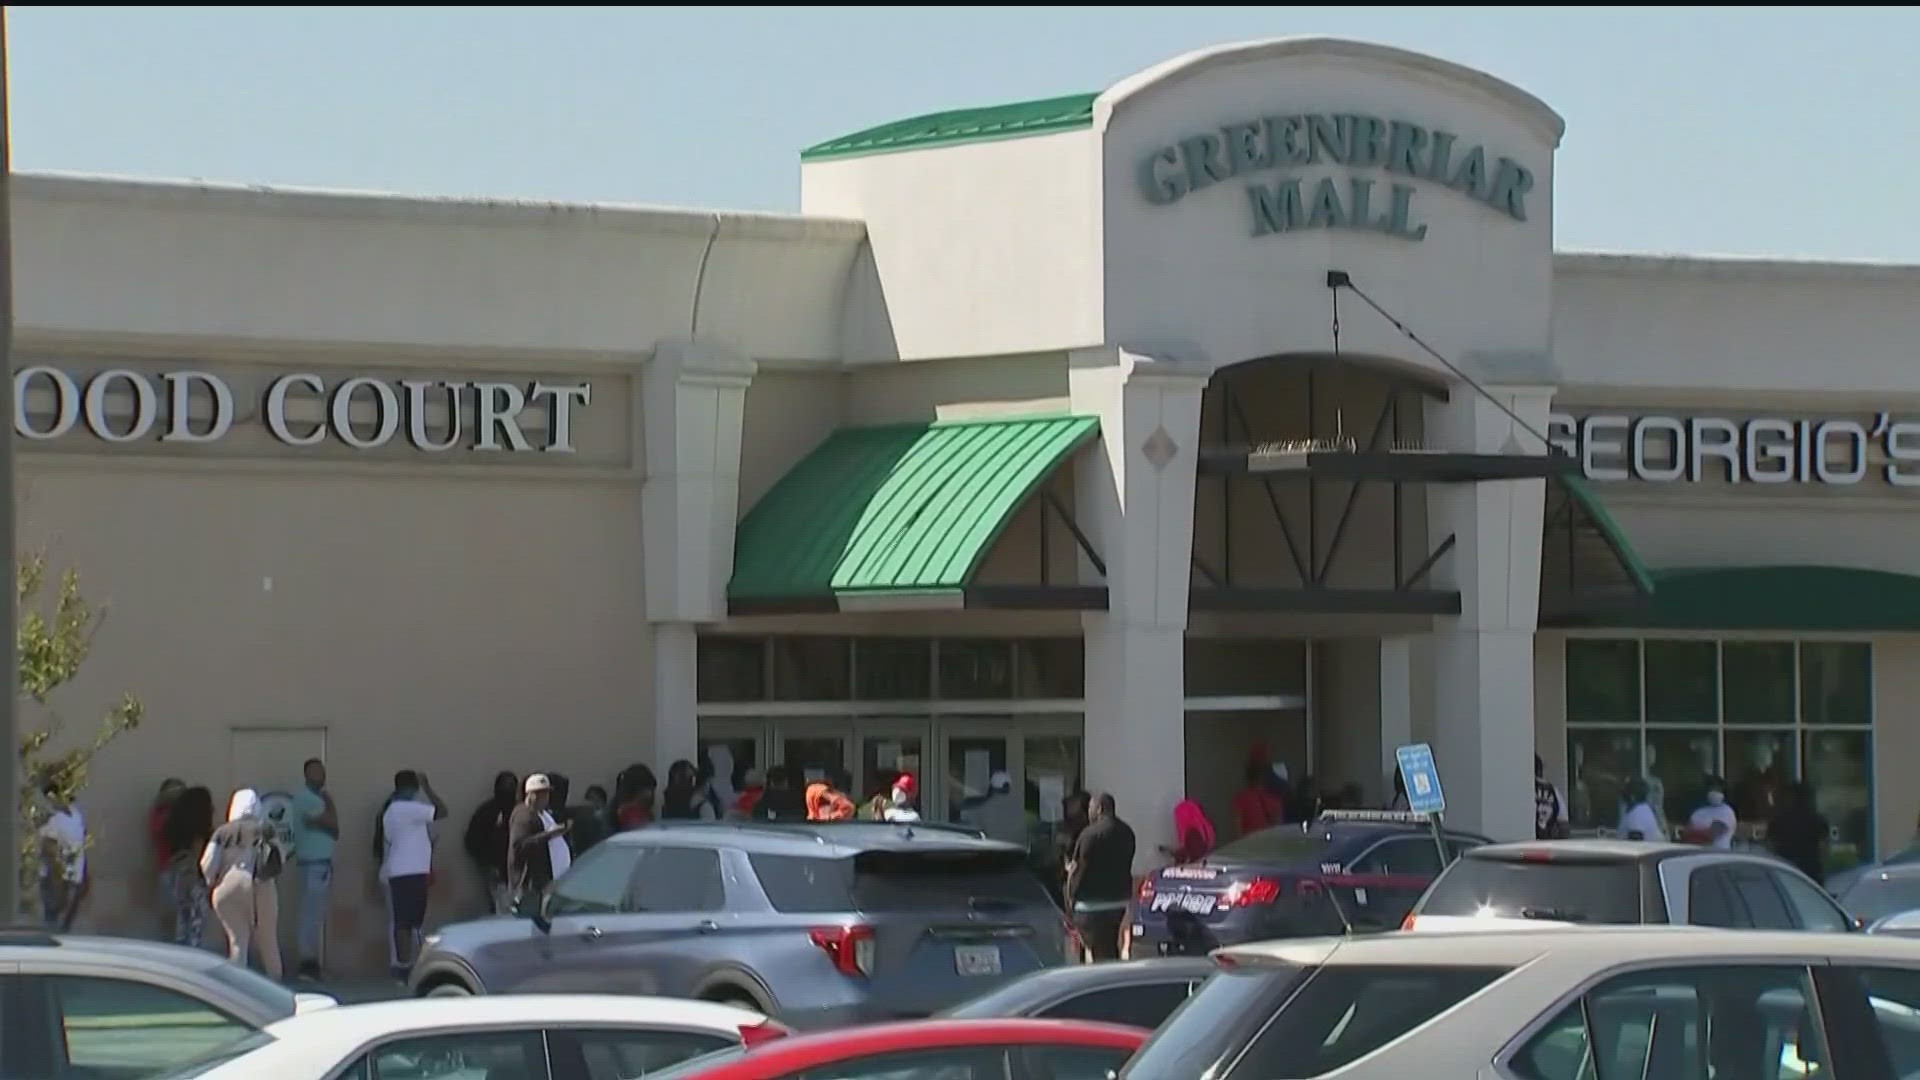 Atlanta Police Department officers were investigating the incident at Greenbriar Mall.